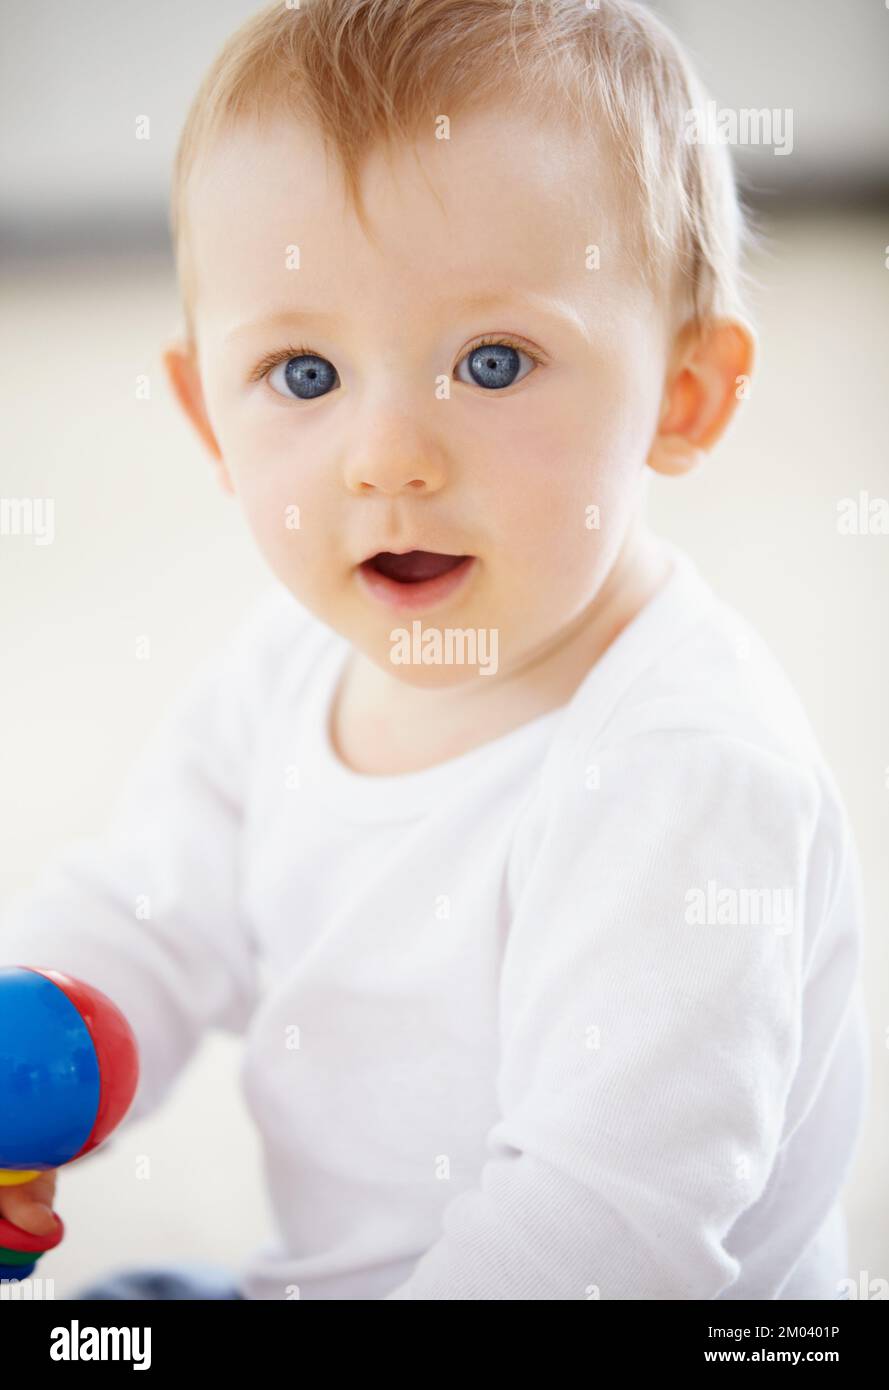 Playing and learning...Portrait of an adorable baby boy smiling at the camera while playing. Stock Photo